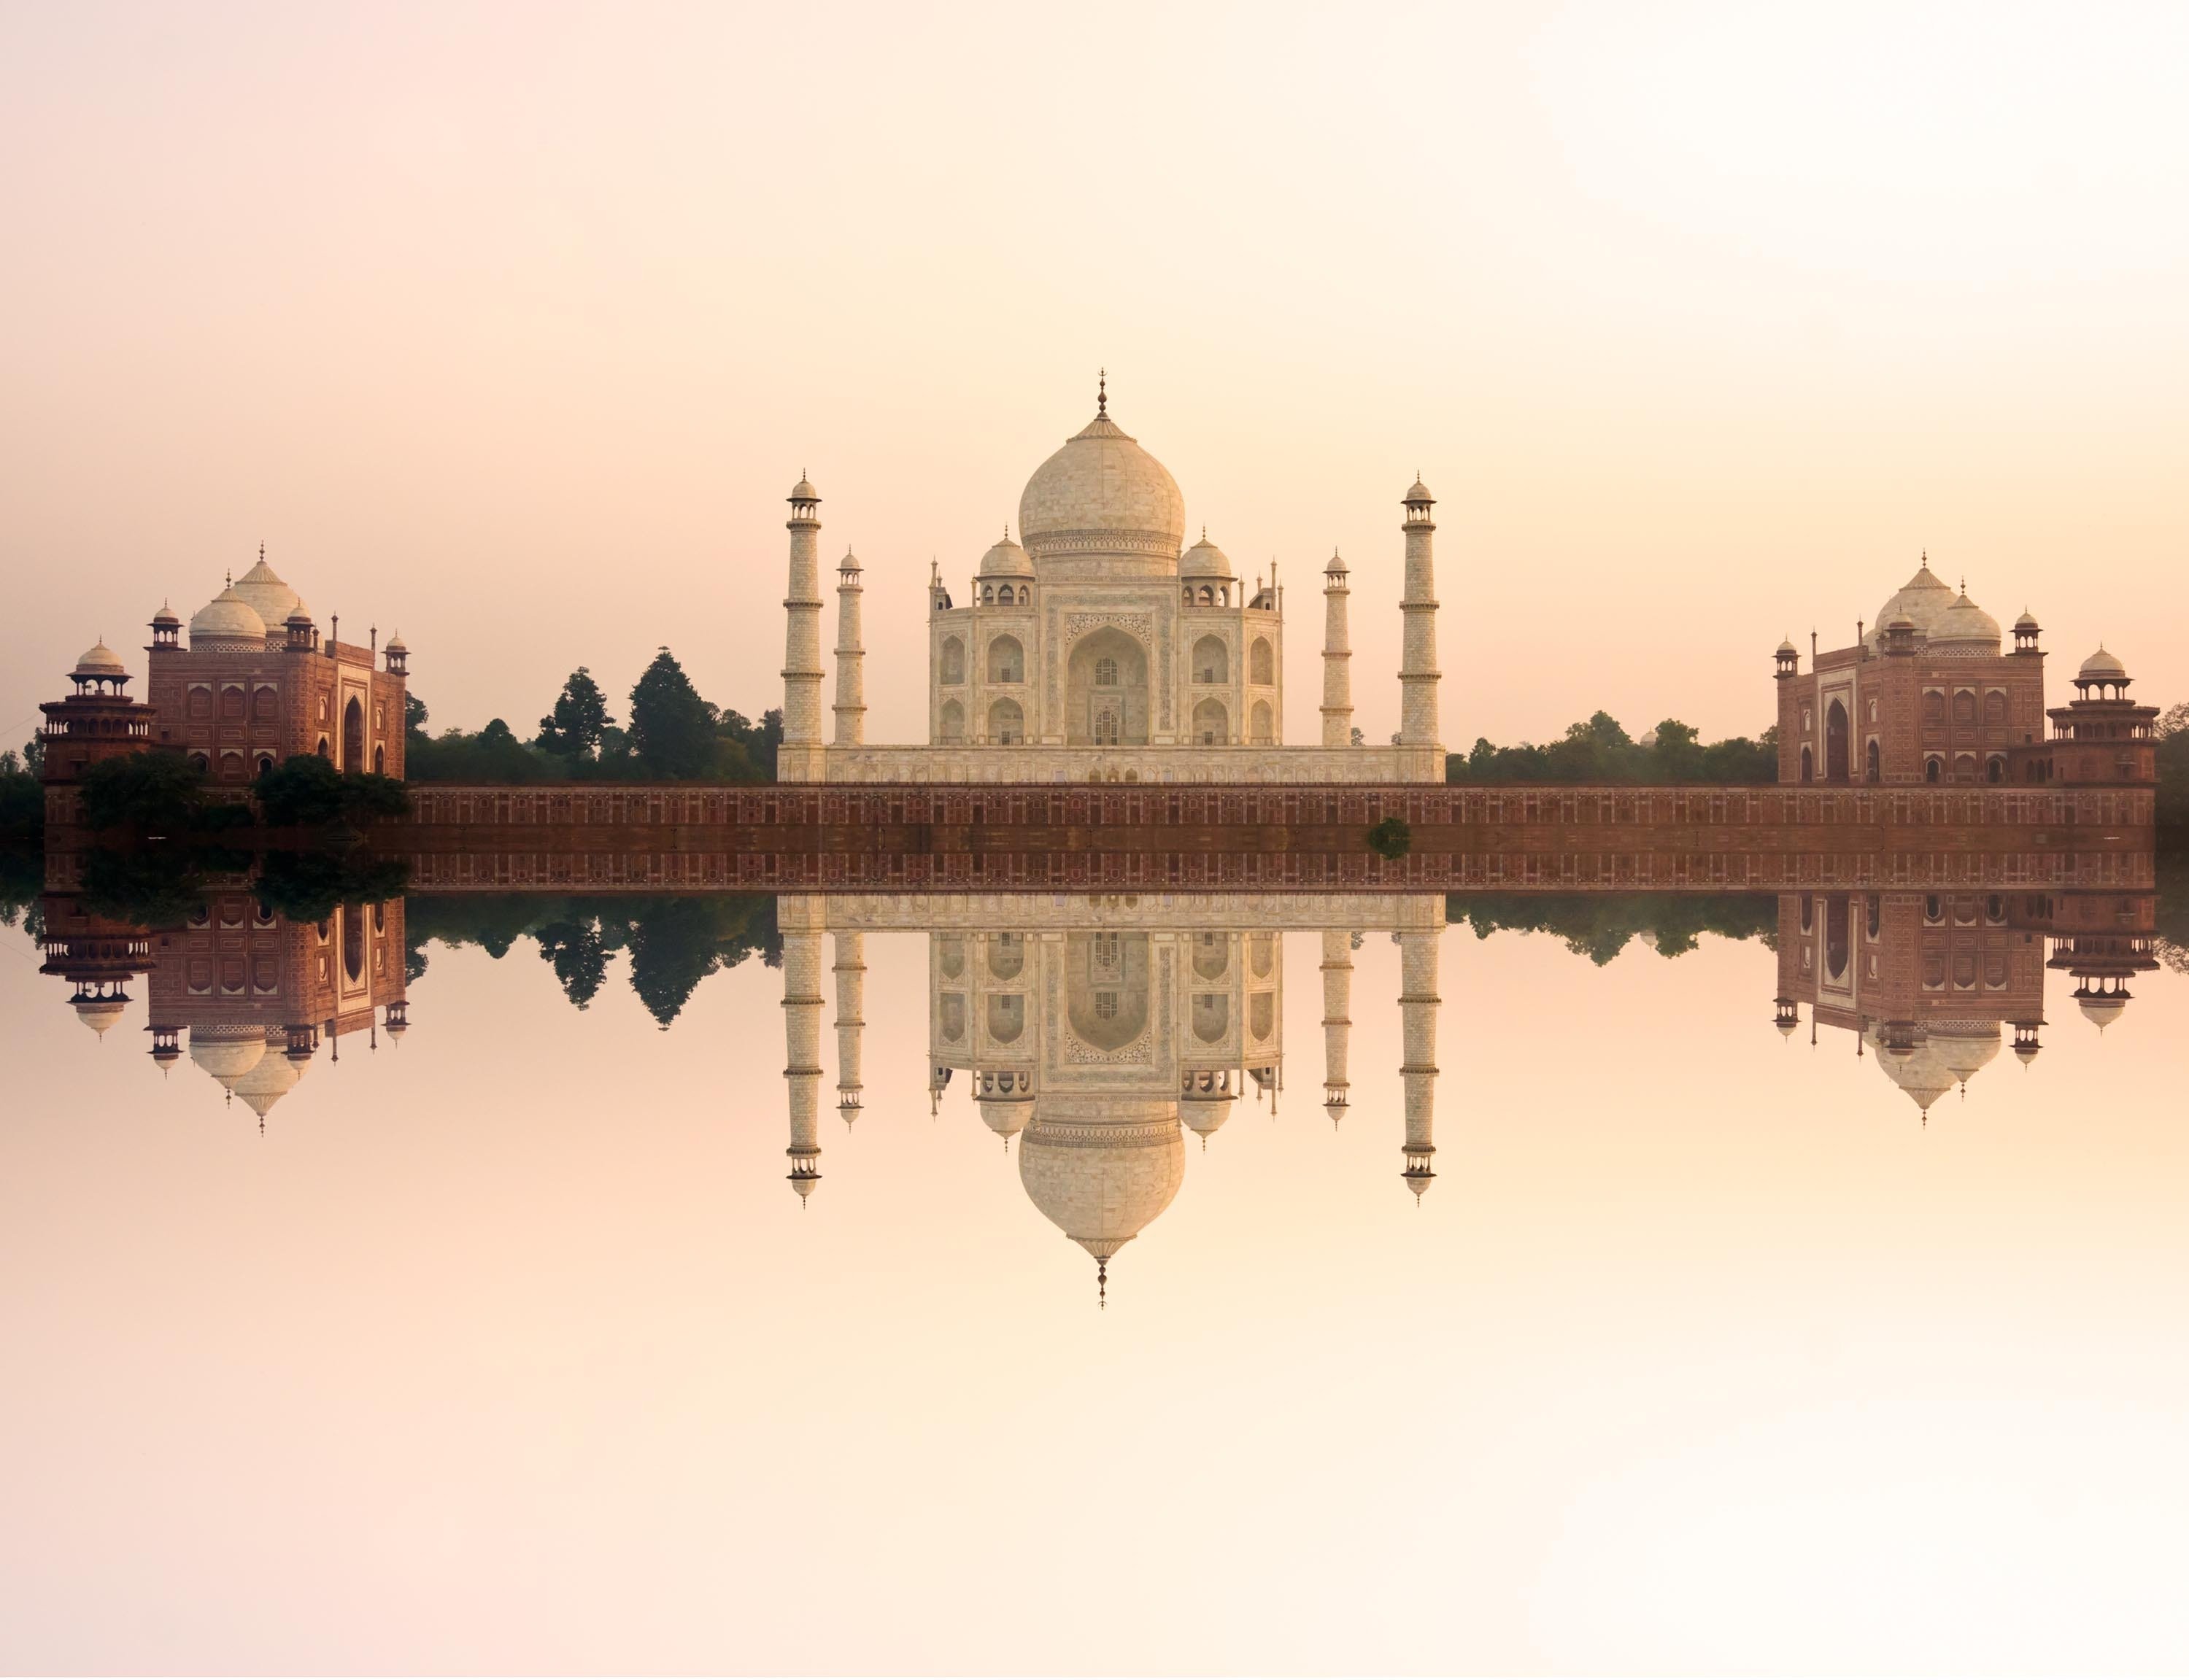 Panoramic view of Taj Mahal at sunset with reflection, Agra, India. 